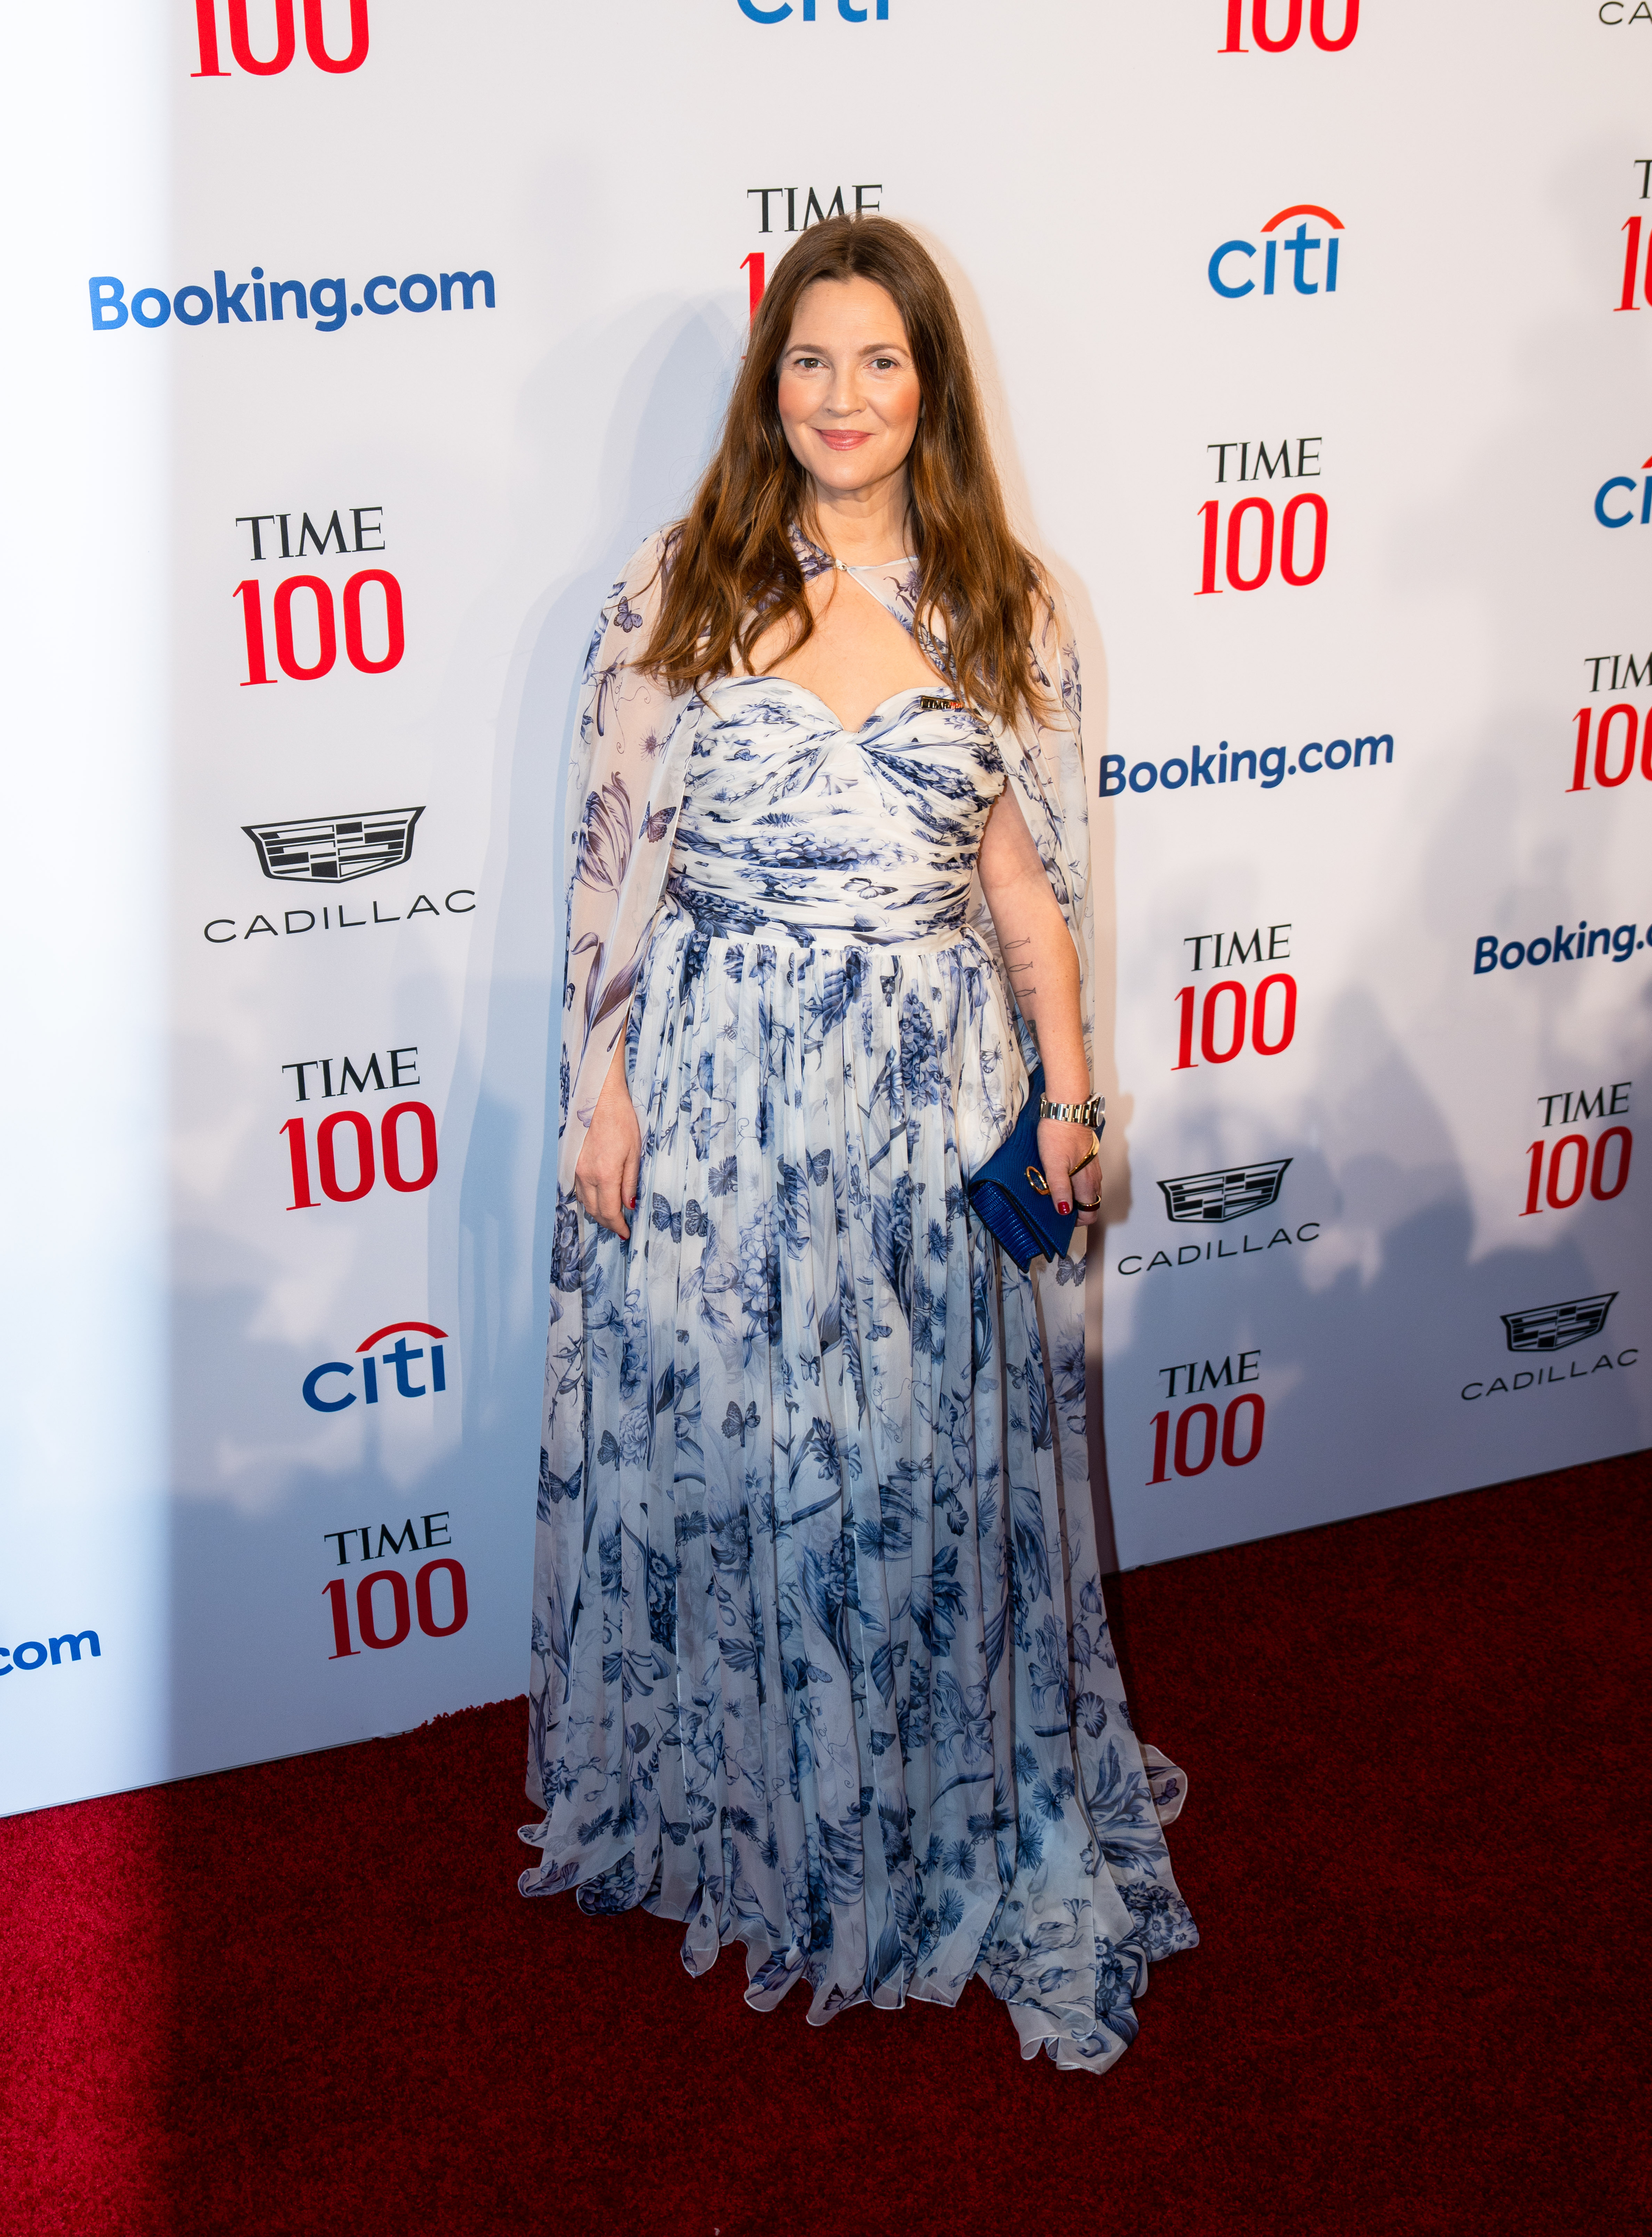 Drew Barrymore stands on the red carpet in a flow-y strapless dress with a matching cape